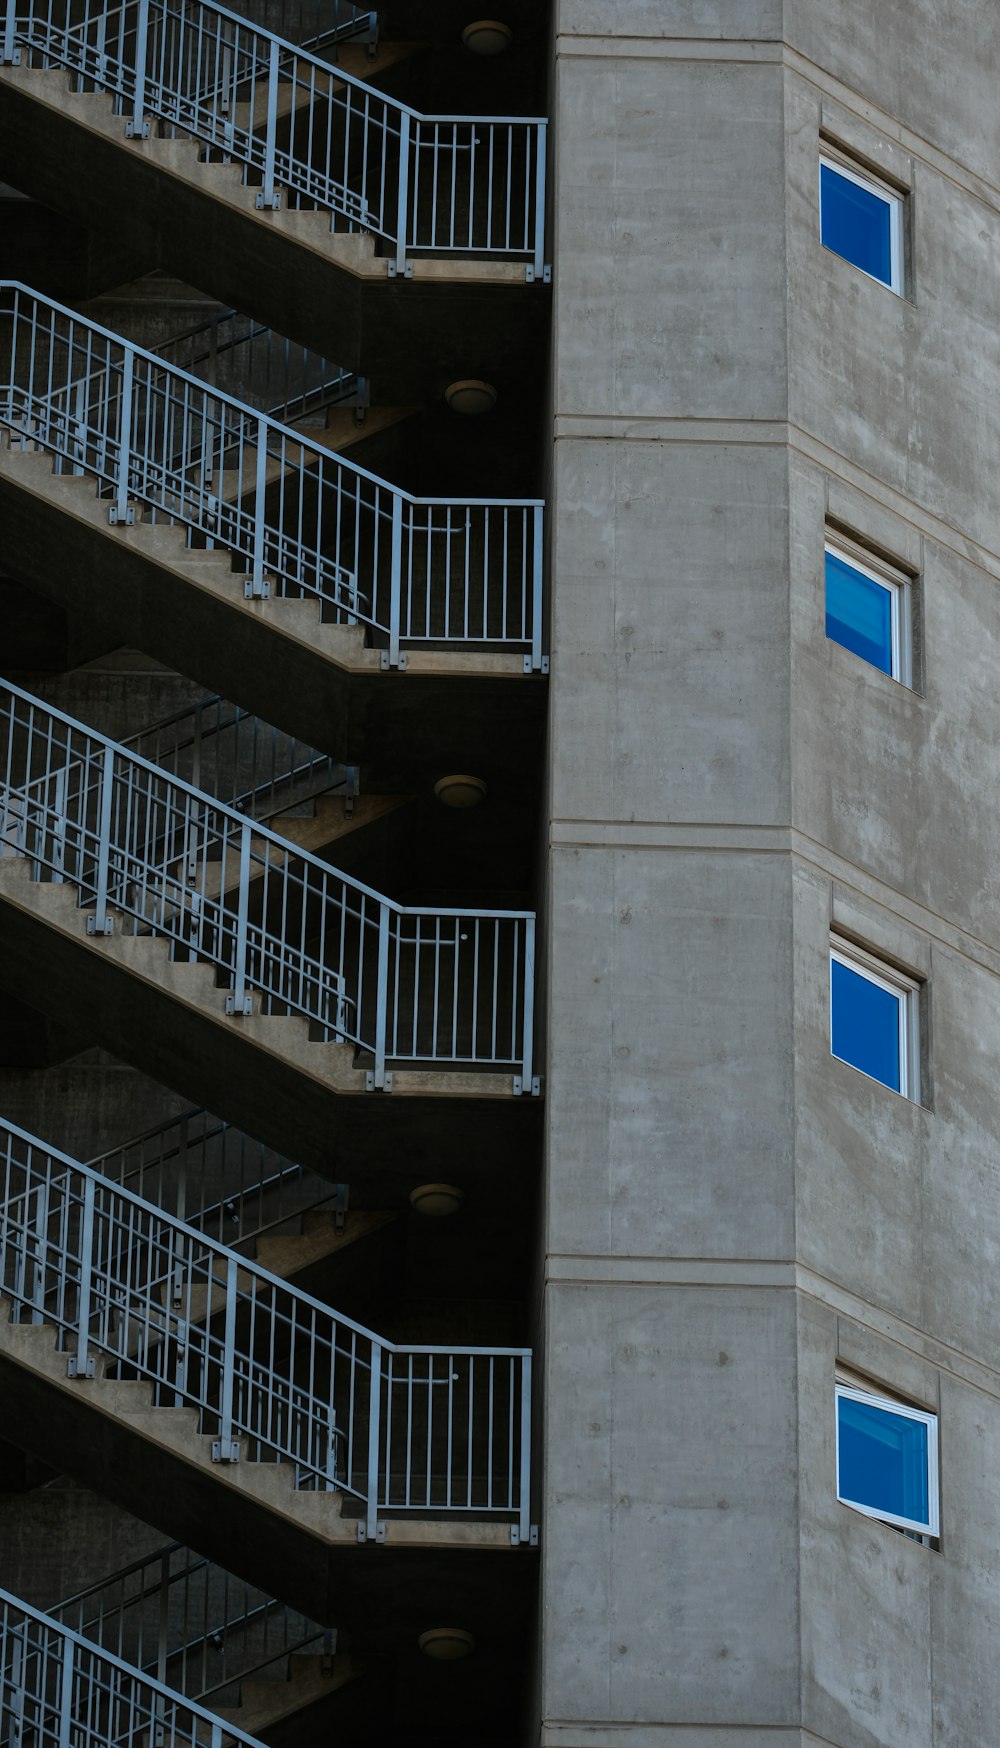 a tall building with balconies and blue windows